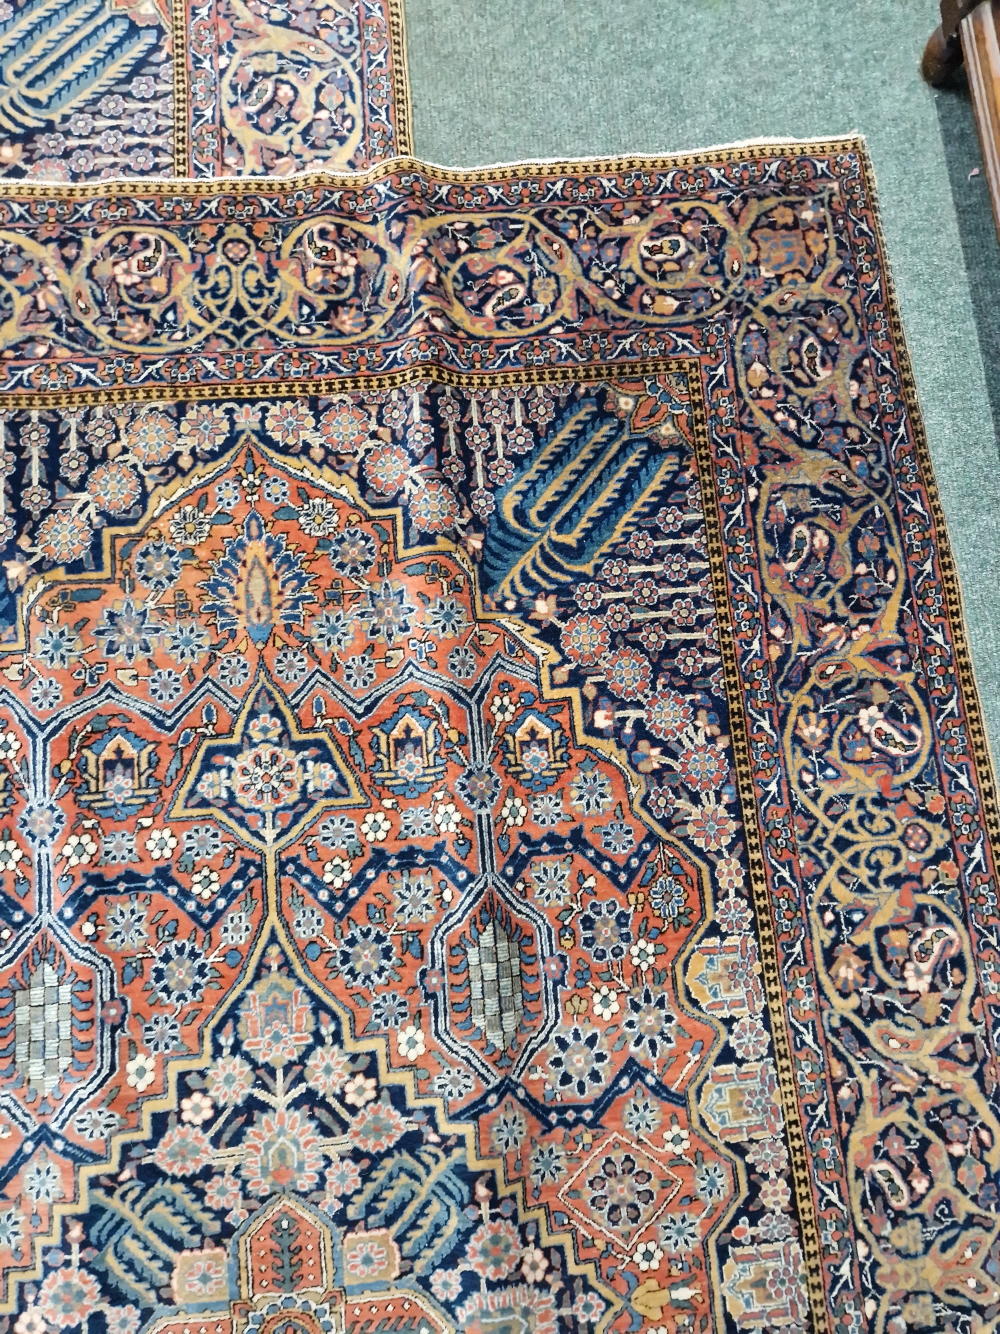 A PAIR OF ANTIQUE PERSIAN KASHAN RUGS. 298 x 132cms - Image 6 of 12